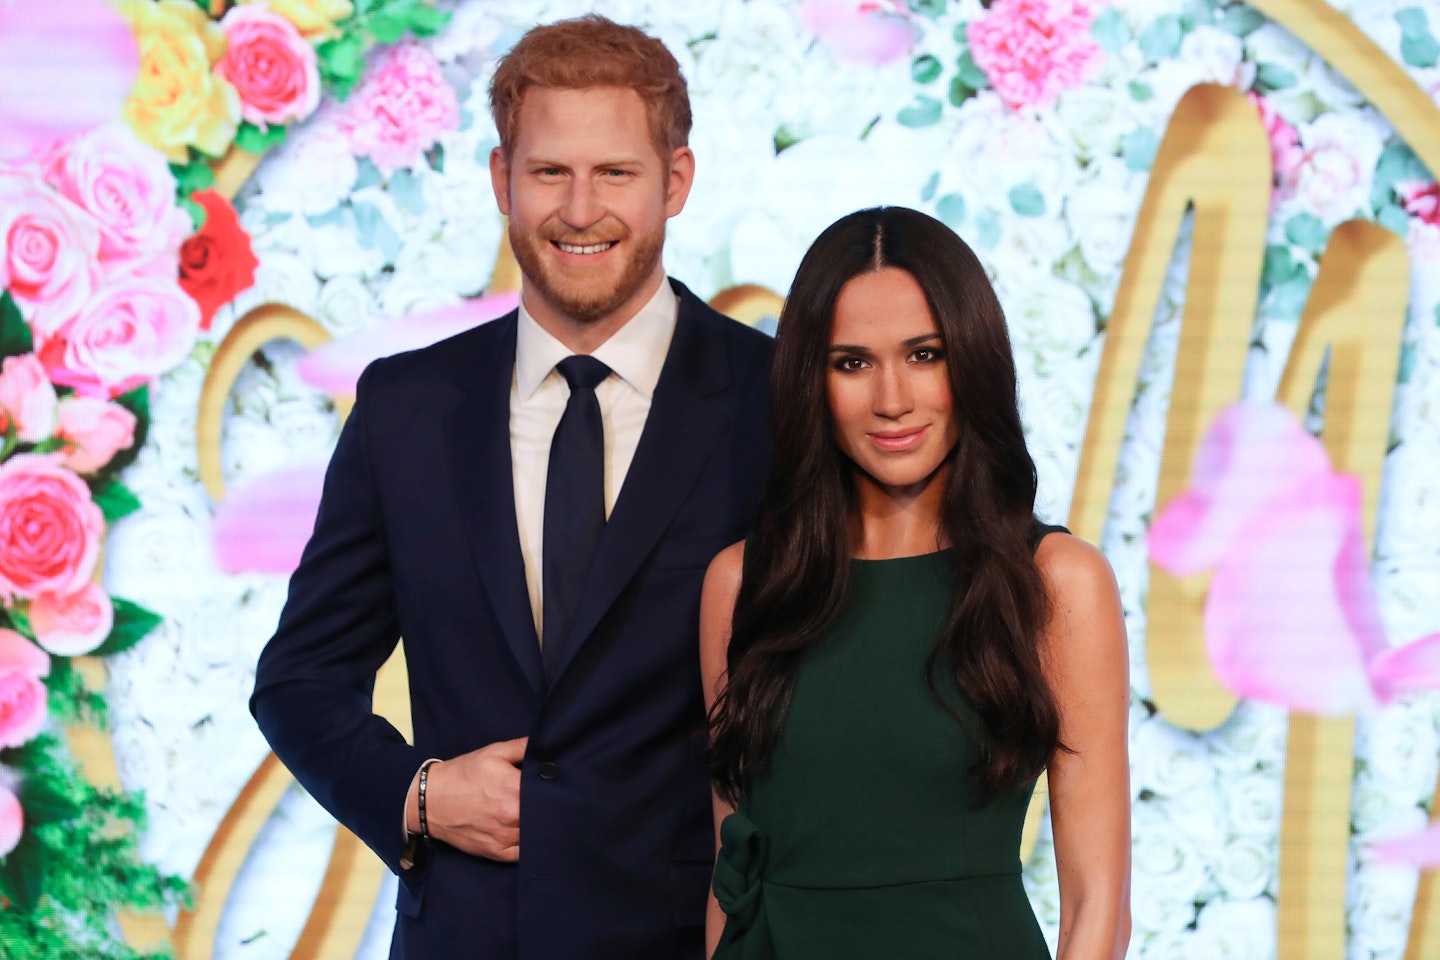 What Will Madame Tussauds Do With Harry And Meghan's Removed Wax Works?